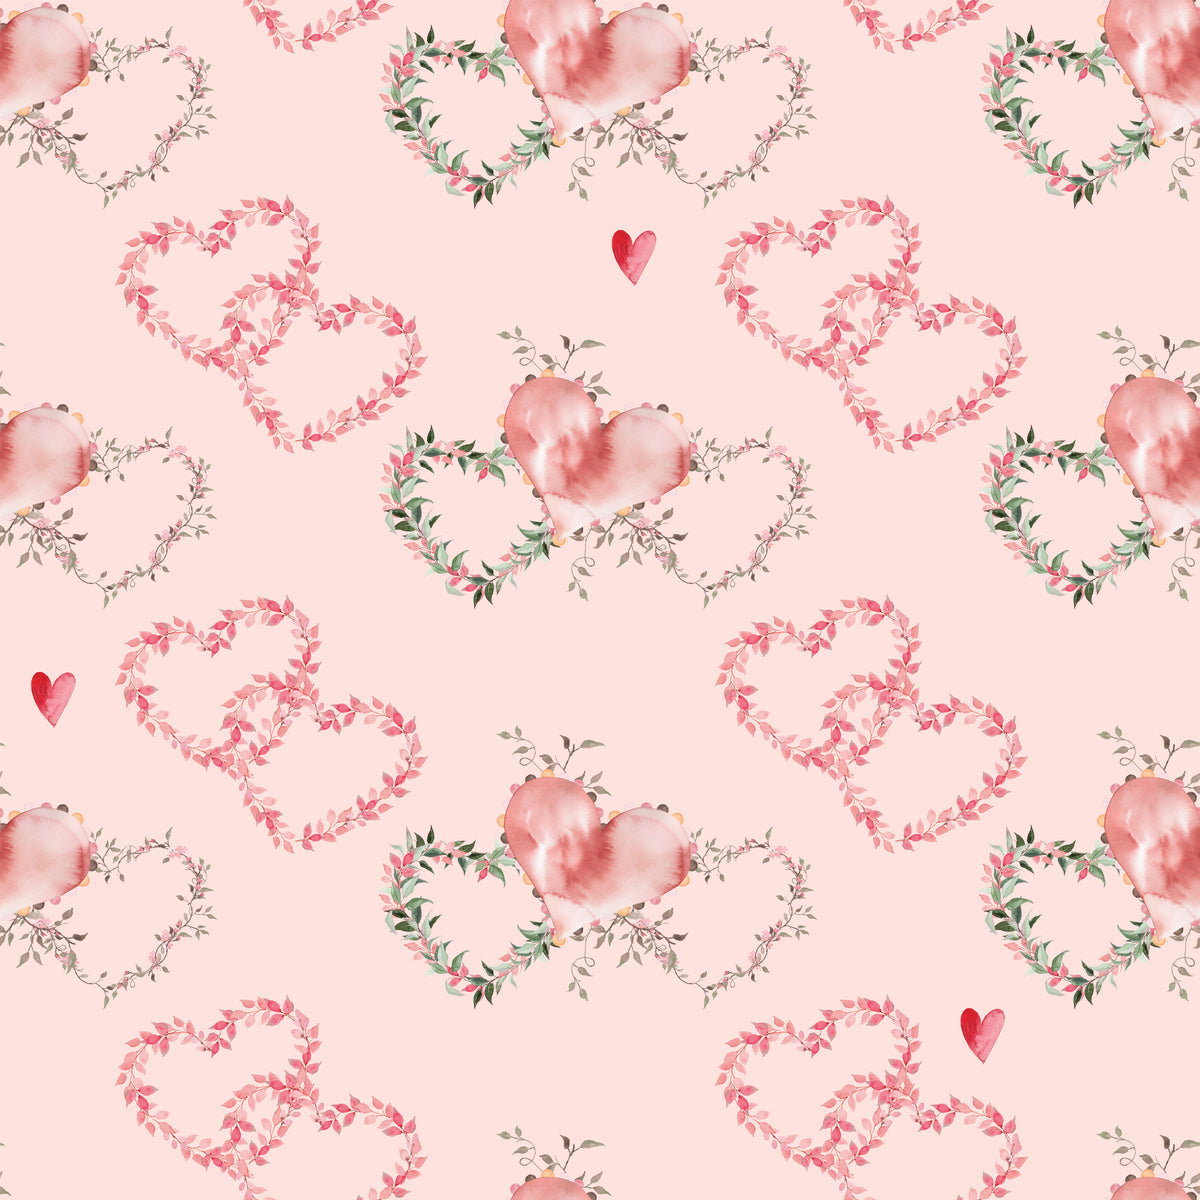 Wedding Valentine's Day Girlish Romantic Textile Wrapping Paper